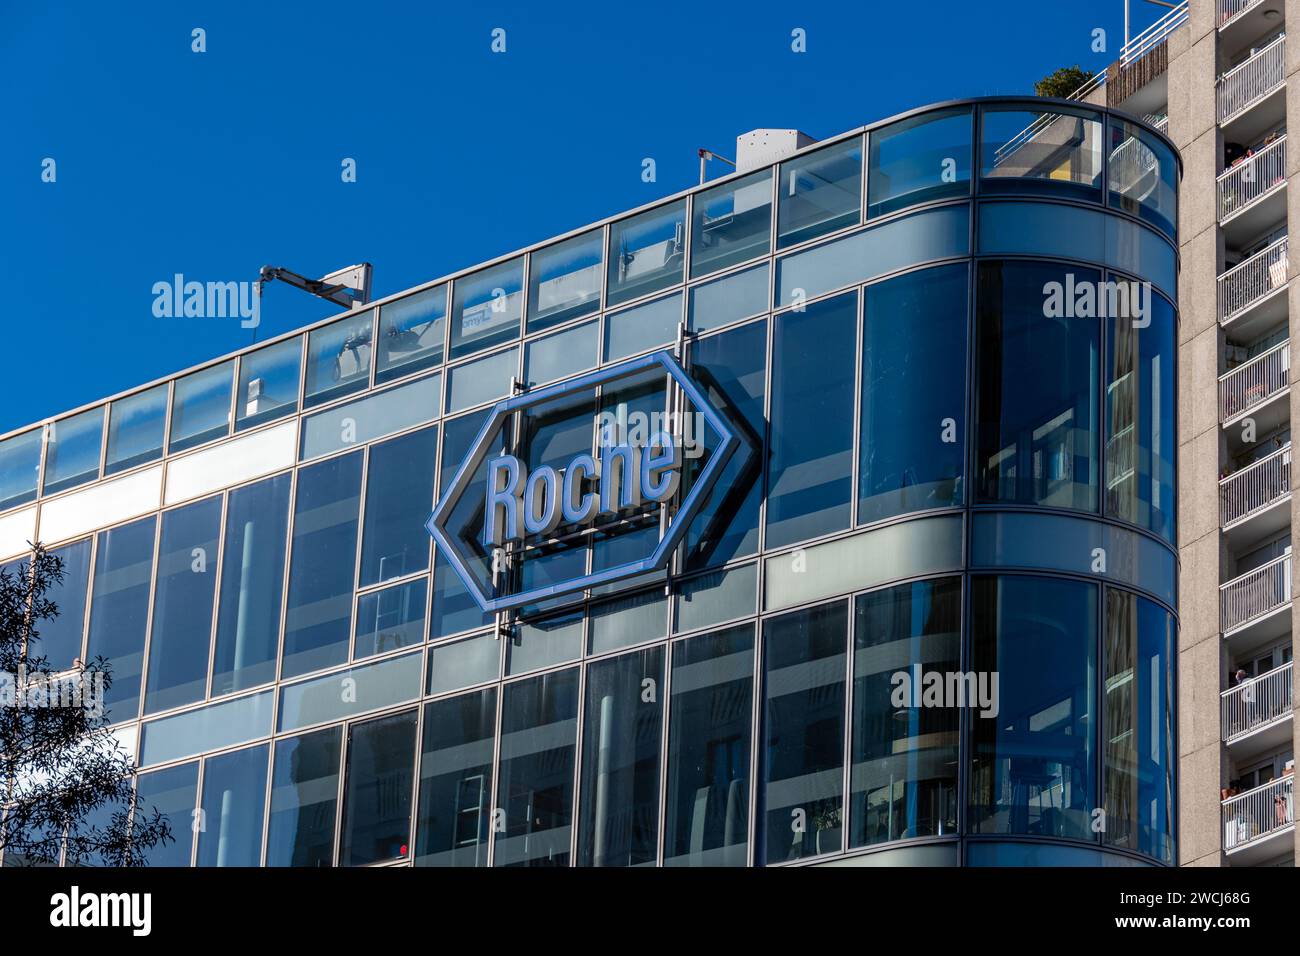 Sign and logo on the building housing the headquarters of Roche France, French subsidiary of the Swiss pharmaceutical group F. Hoffmann-La Roche Stock Photo